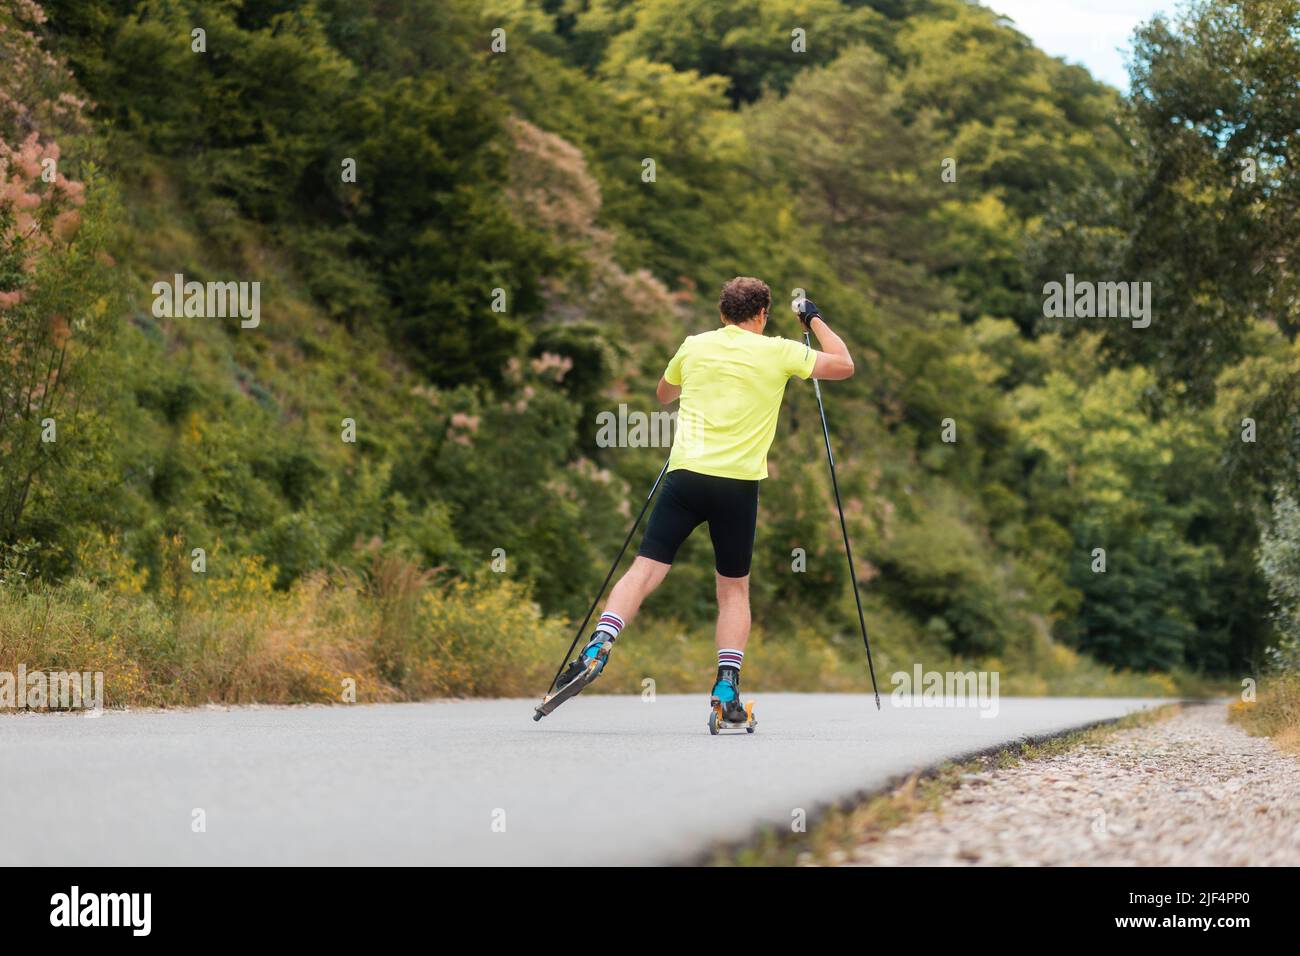 Biathlon workout. Athletic man training on the roller ski at country road, back view. Concept of competition and summer activity. Stock Photo